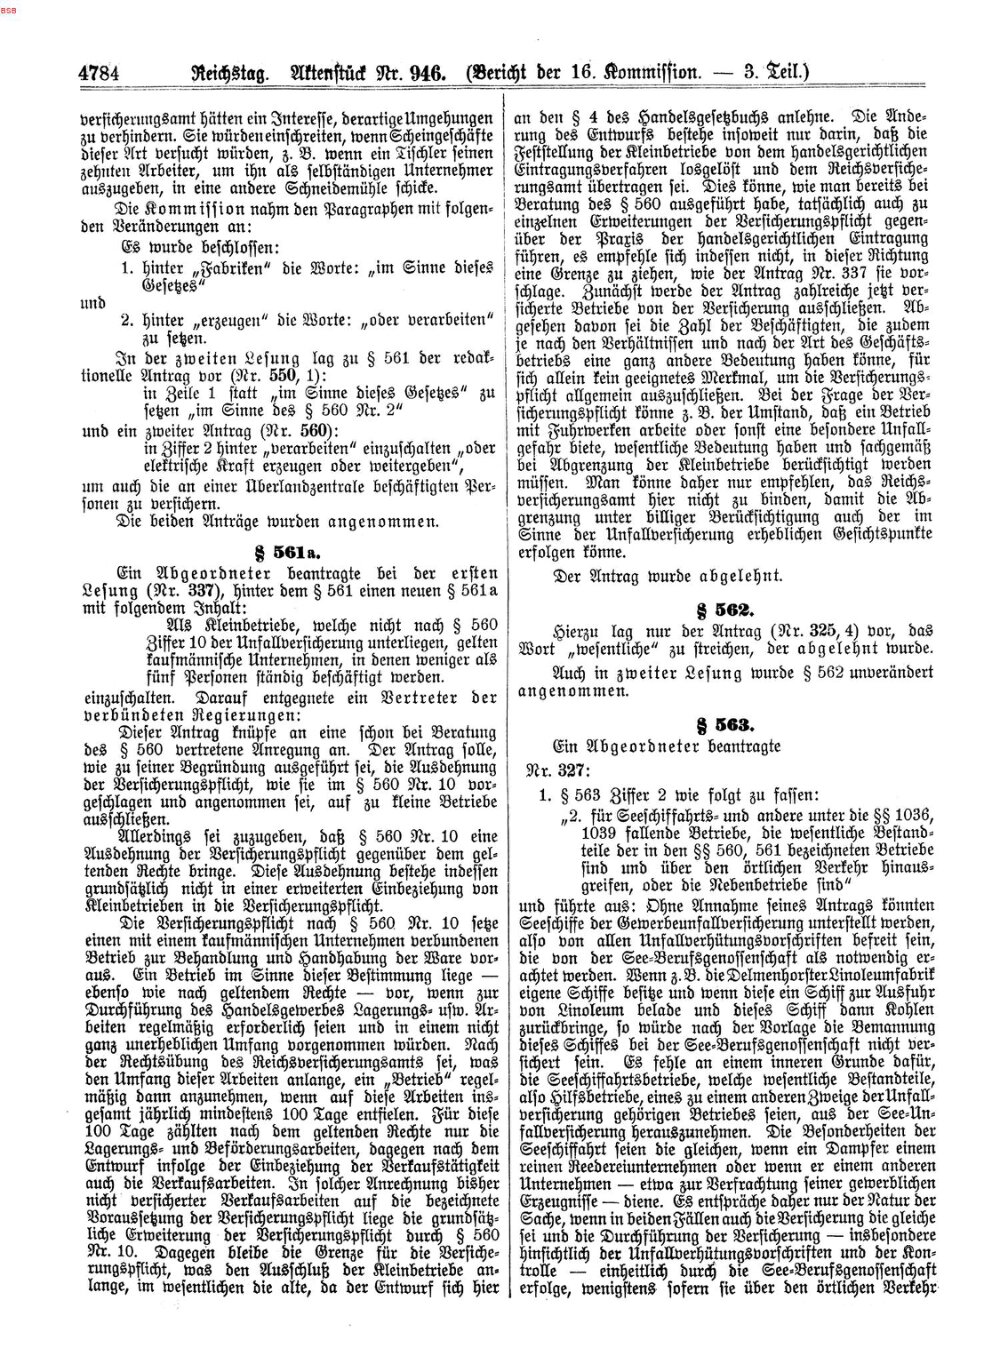 Scan of page 4784